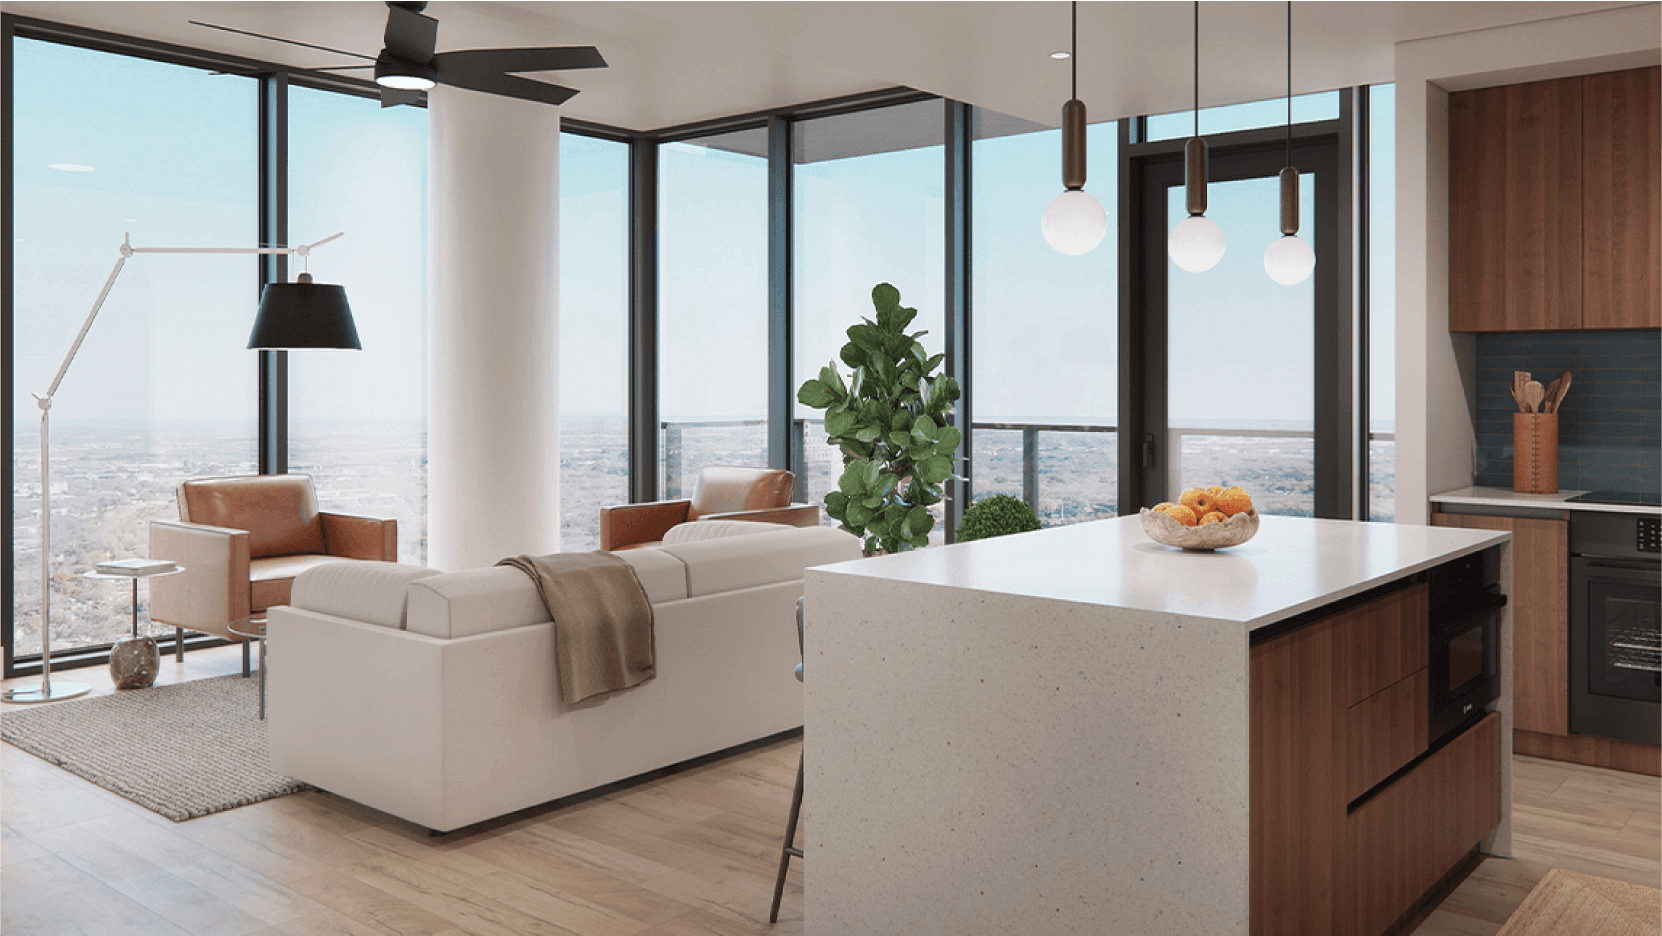 Luxurious condo living room at Vesper ATX with floor-to-ceiling windows showcasing expansive views of Austin, featuring a modern white sofa, leather armchairs, and a stylish floor lamp.